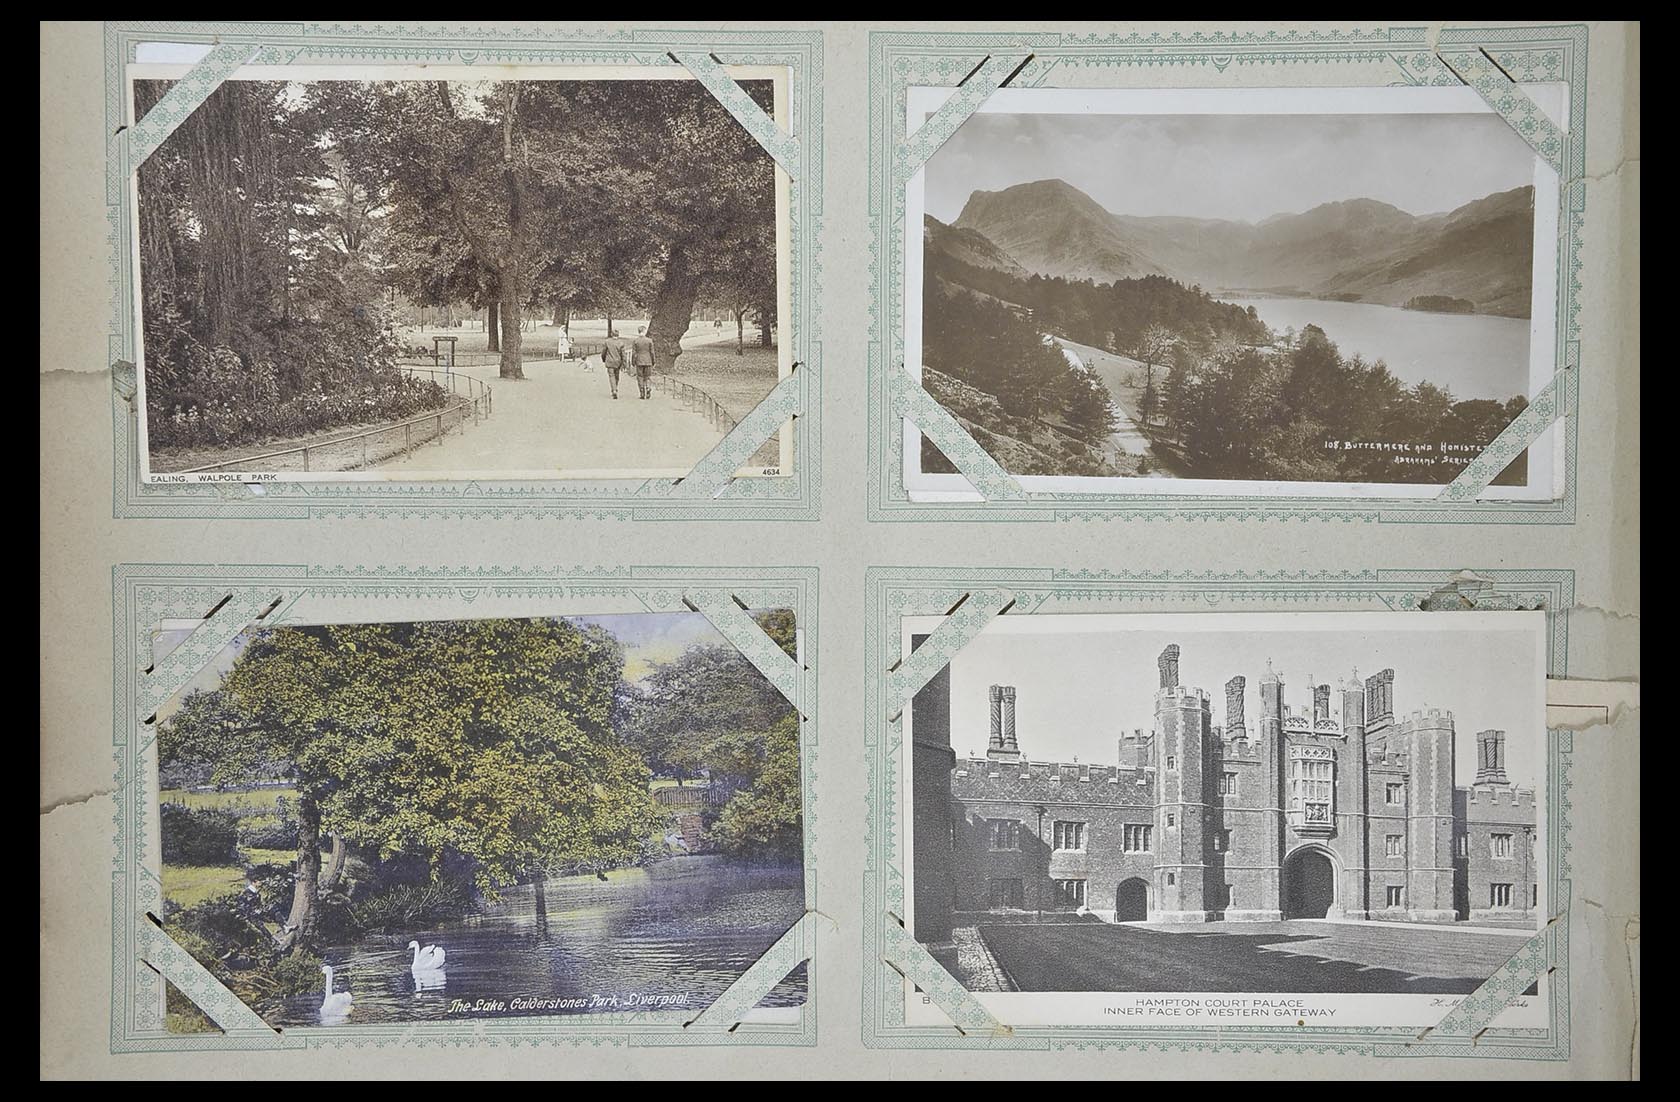 33633 006 - Stamp collection 33633 Great Britain picture postcards 1900-1950.